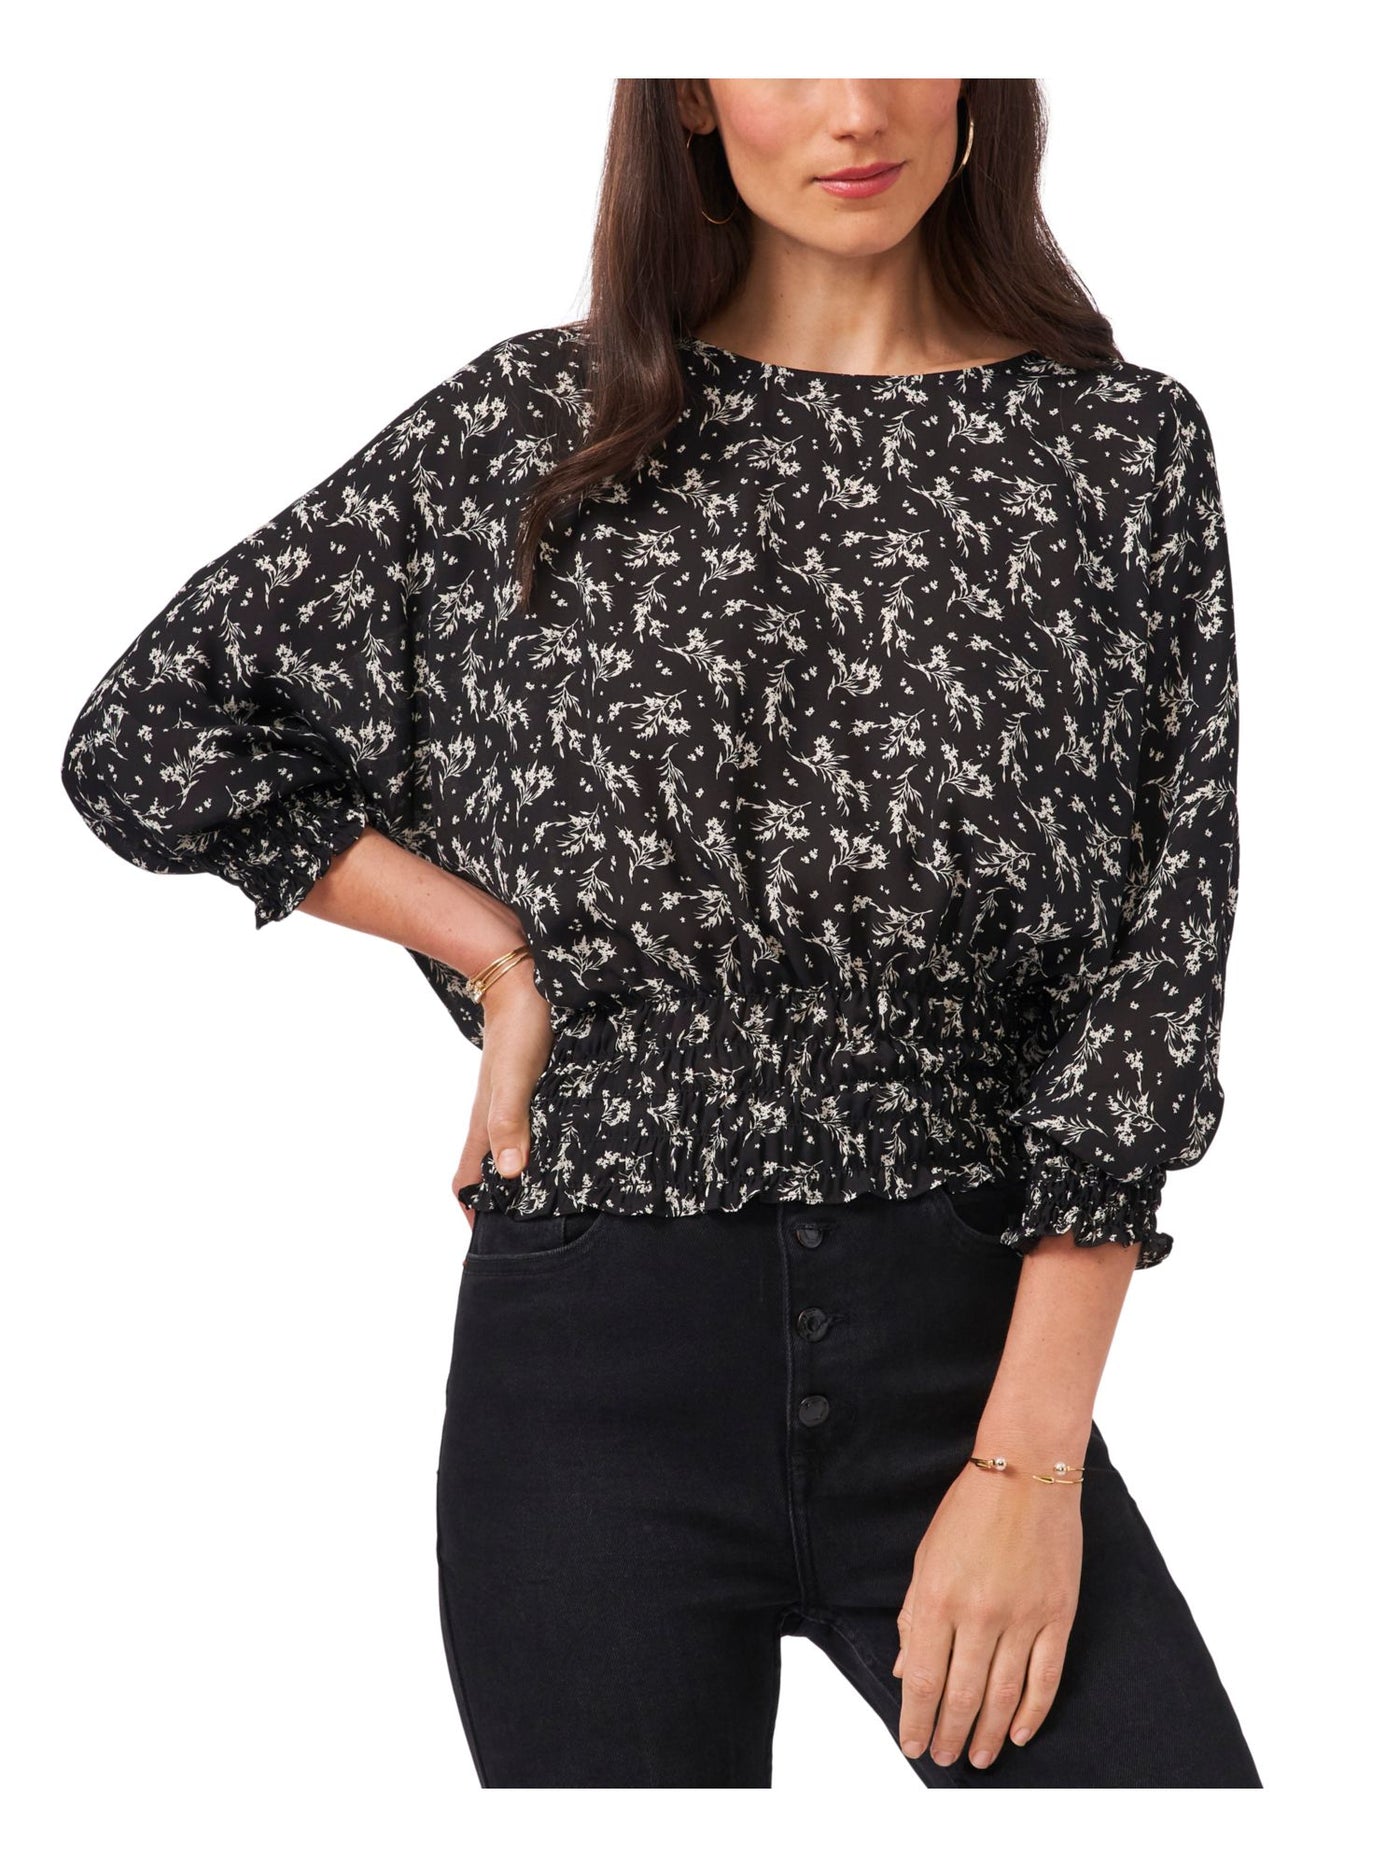 VINCE CAMUTO Womens Black Smocked Floral 3/4 Sleeve Round Neck Top S